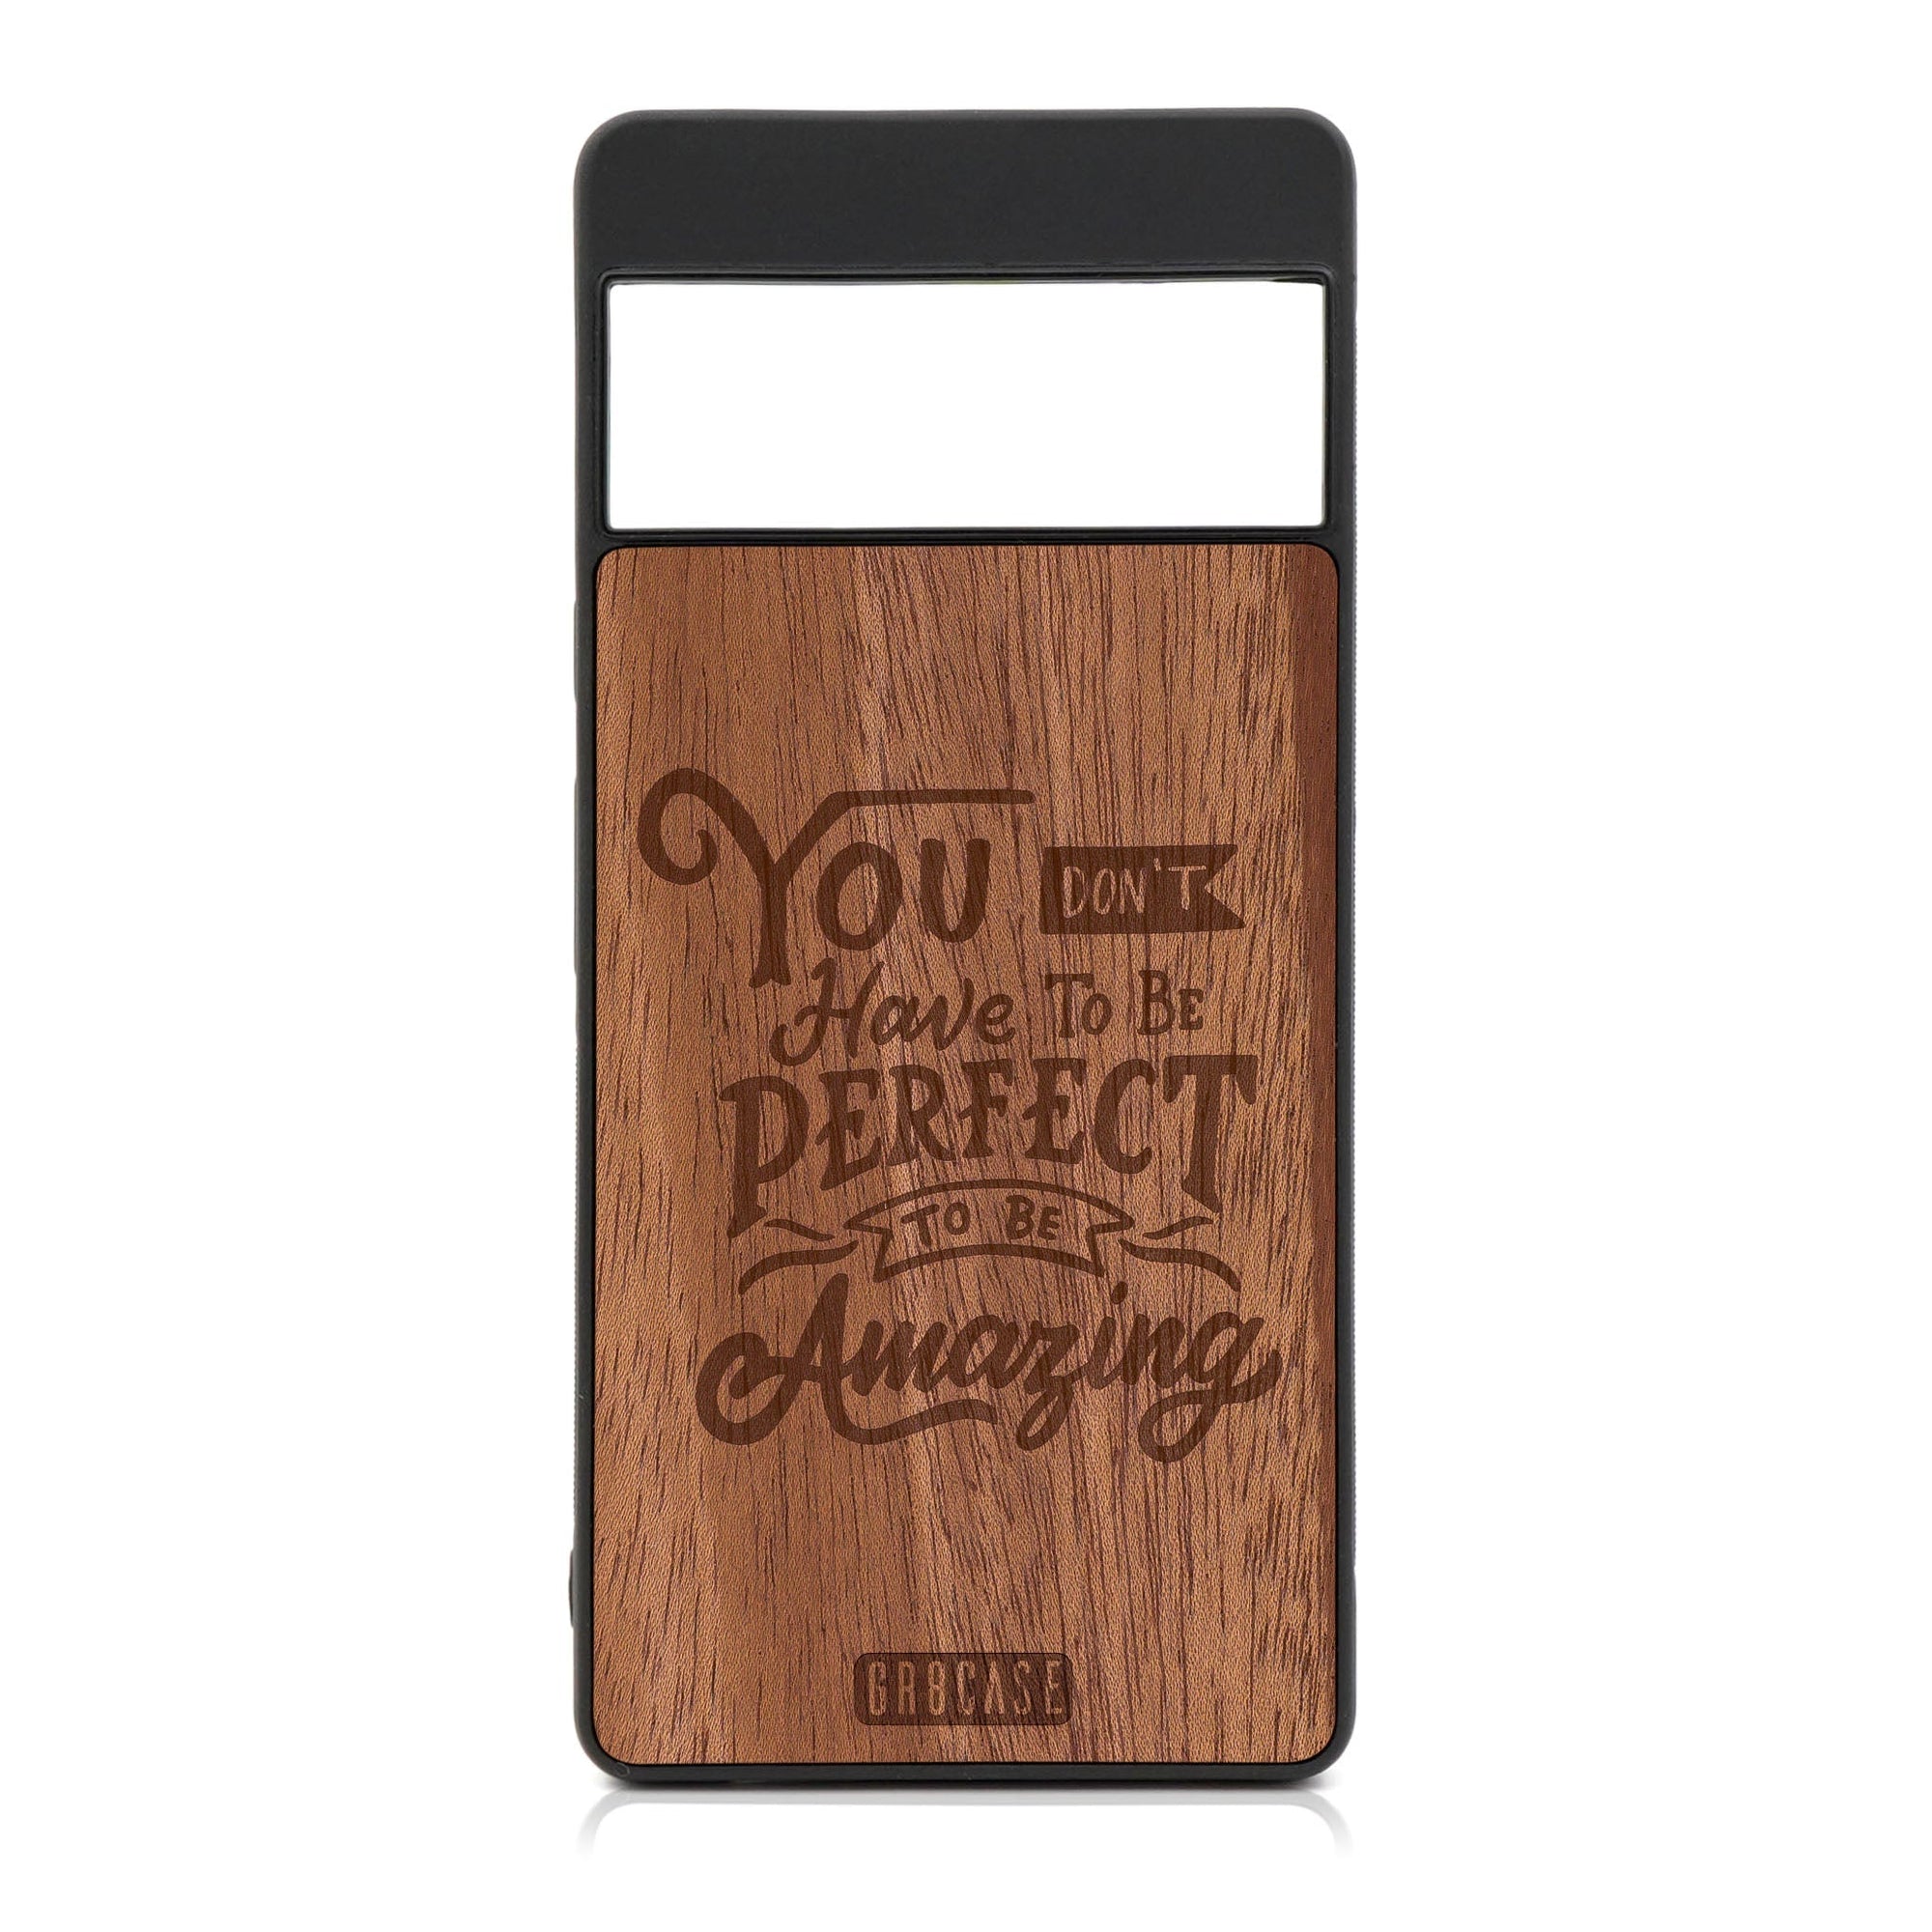 You Don't Have To Be Perfect To Be Amazing Design Wood Case For Google Pixel 7 Pro